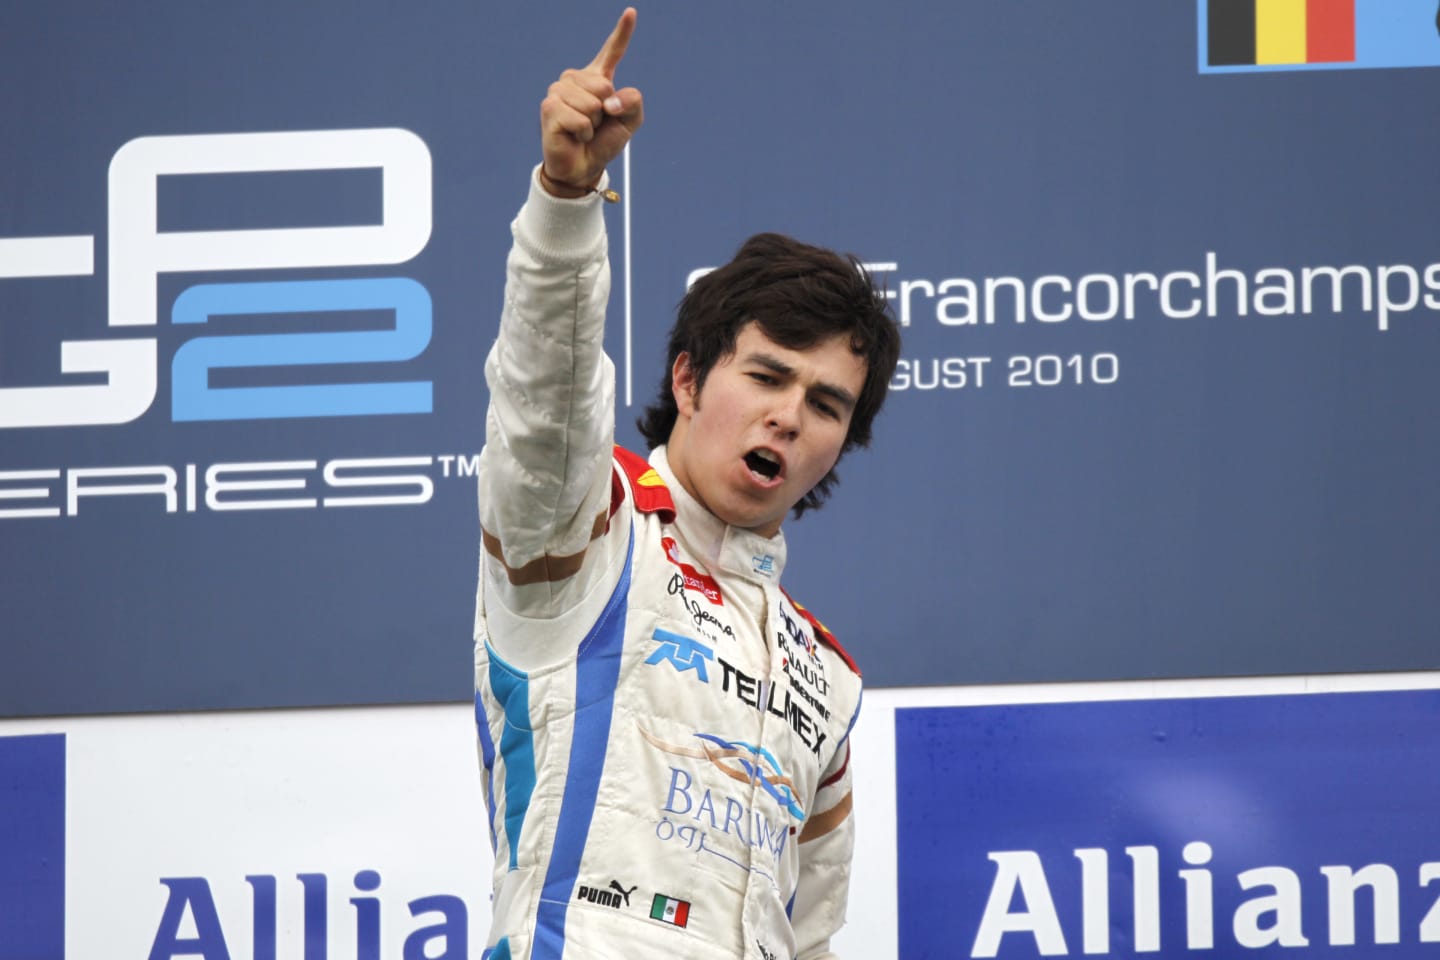 Sergio Perez graduated from British Formula 3 to GP2 in 2009. He was a lowly 12th in his first season with Arden, before a switch to the Barwa Addax Team for 2010 saw Perez finish second to Pastor Maldonado in the championship. The performance led to the Mexican getting a call-up for Sauber for 2011, alongside Kamui Kobayashi.